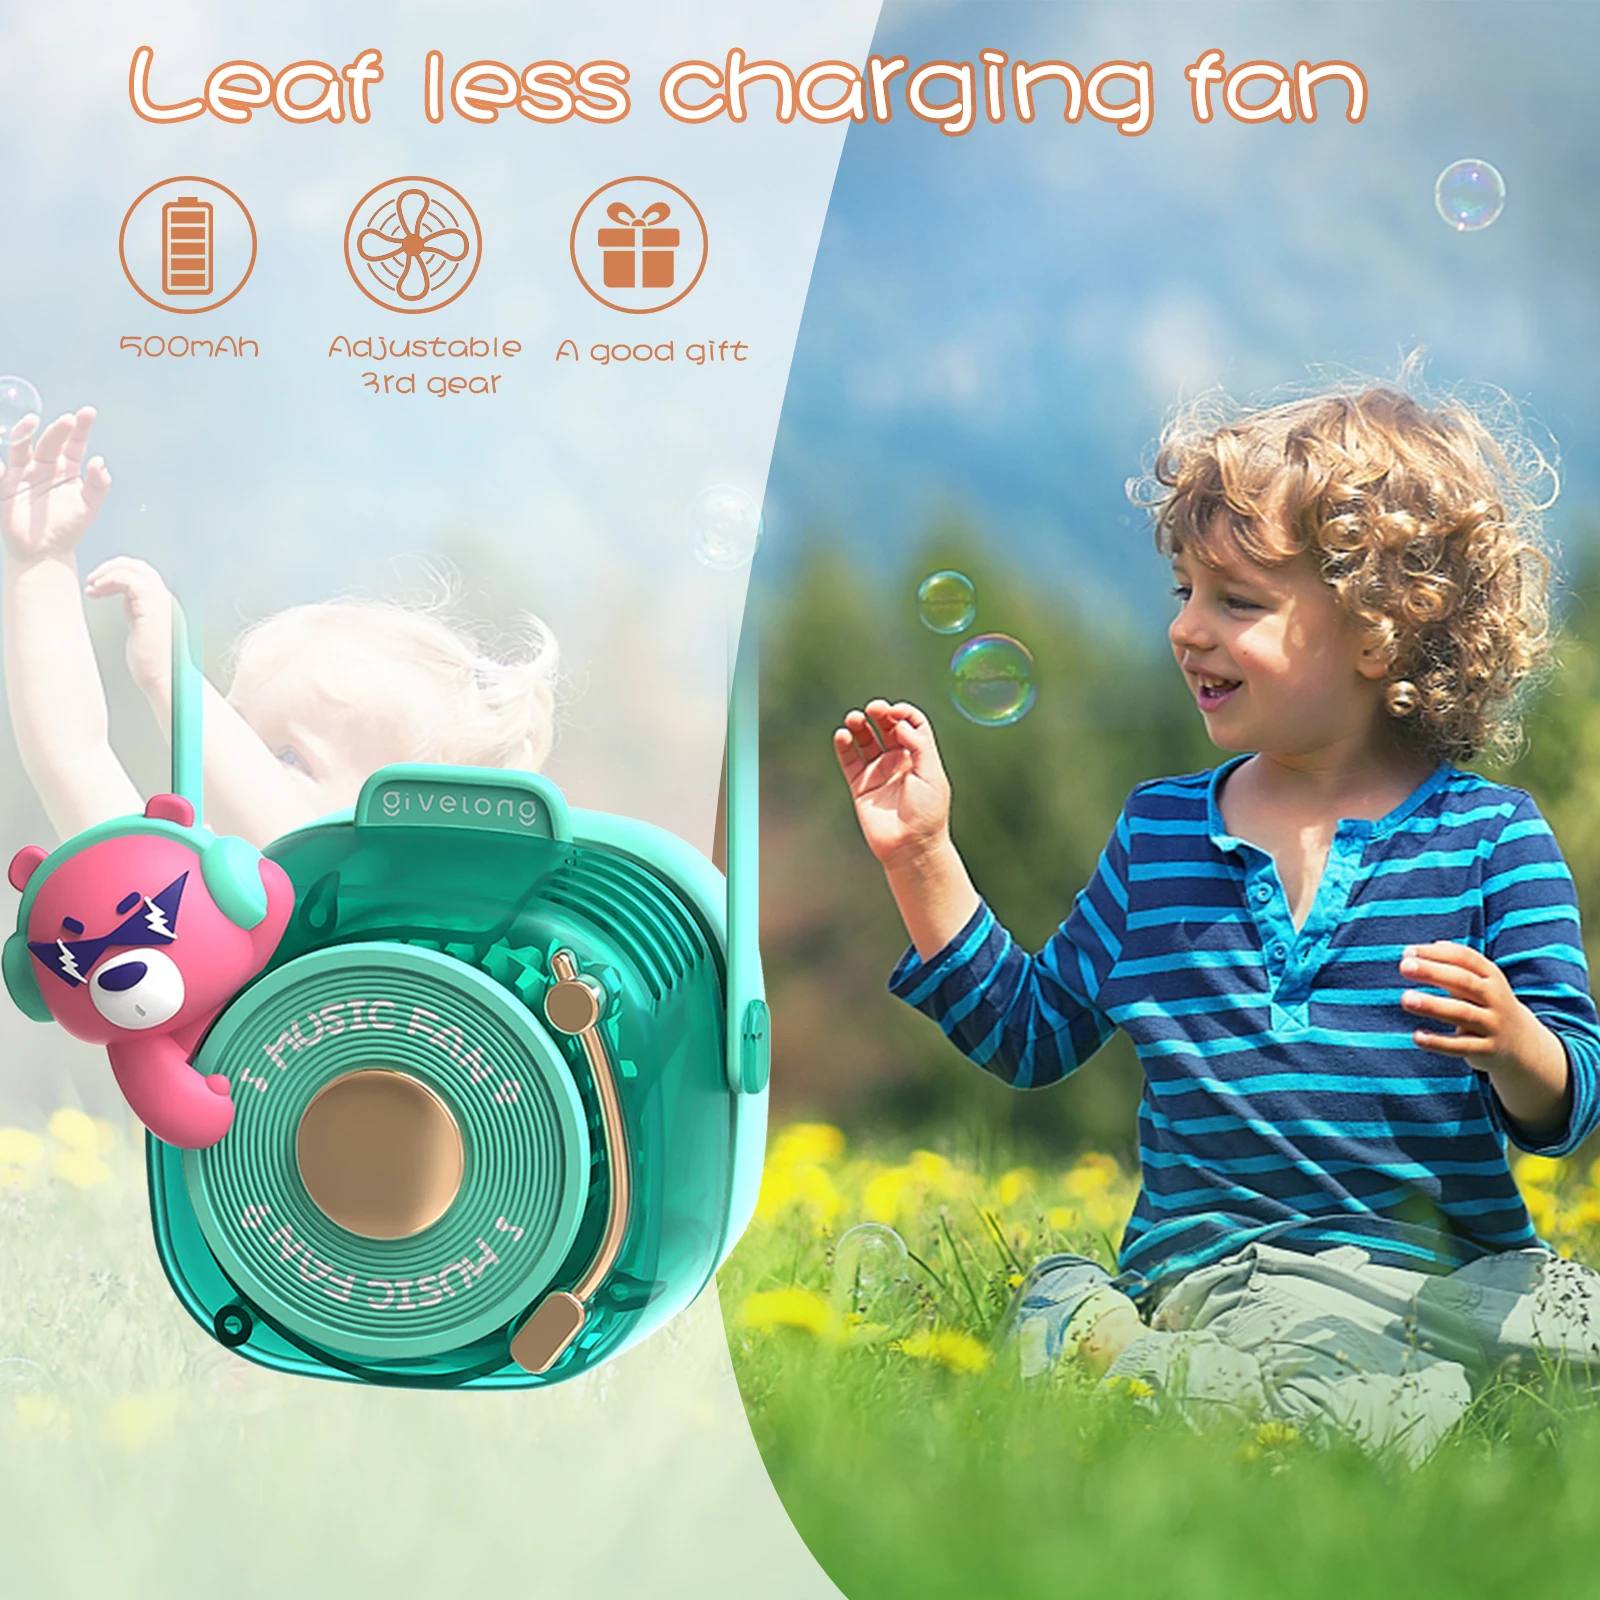 

USB Electric Fan Bladeless Animal Style Lazy Neck Fan Type-C Charging 1W 500mAh 3-speed Adjustable Kids Gifts for Outdoor Travel